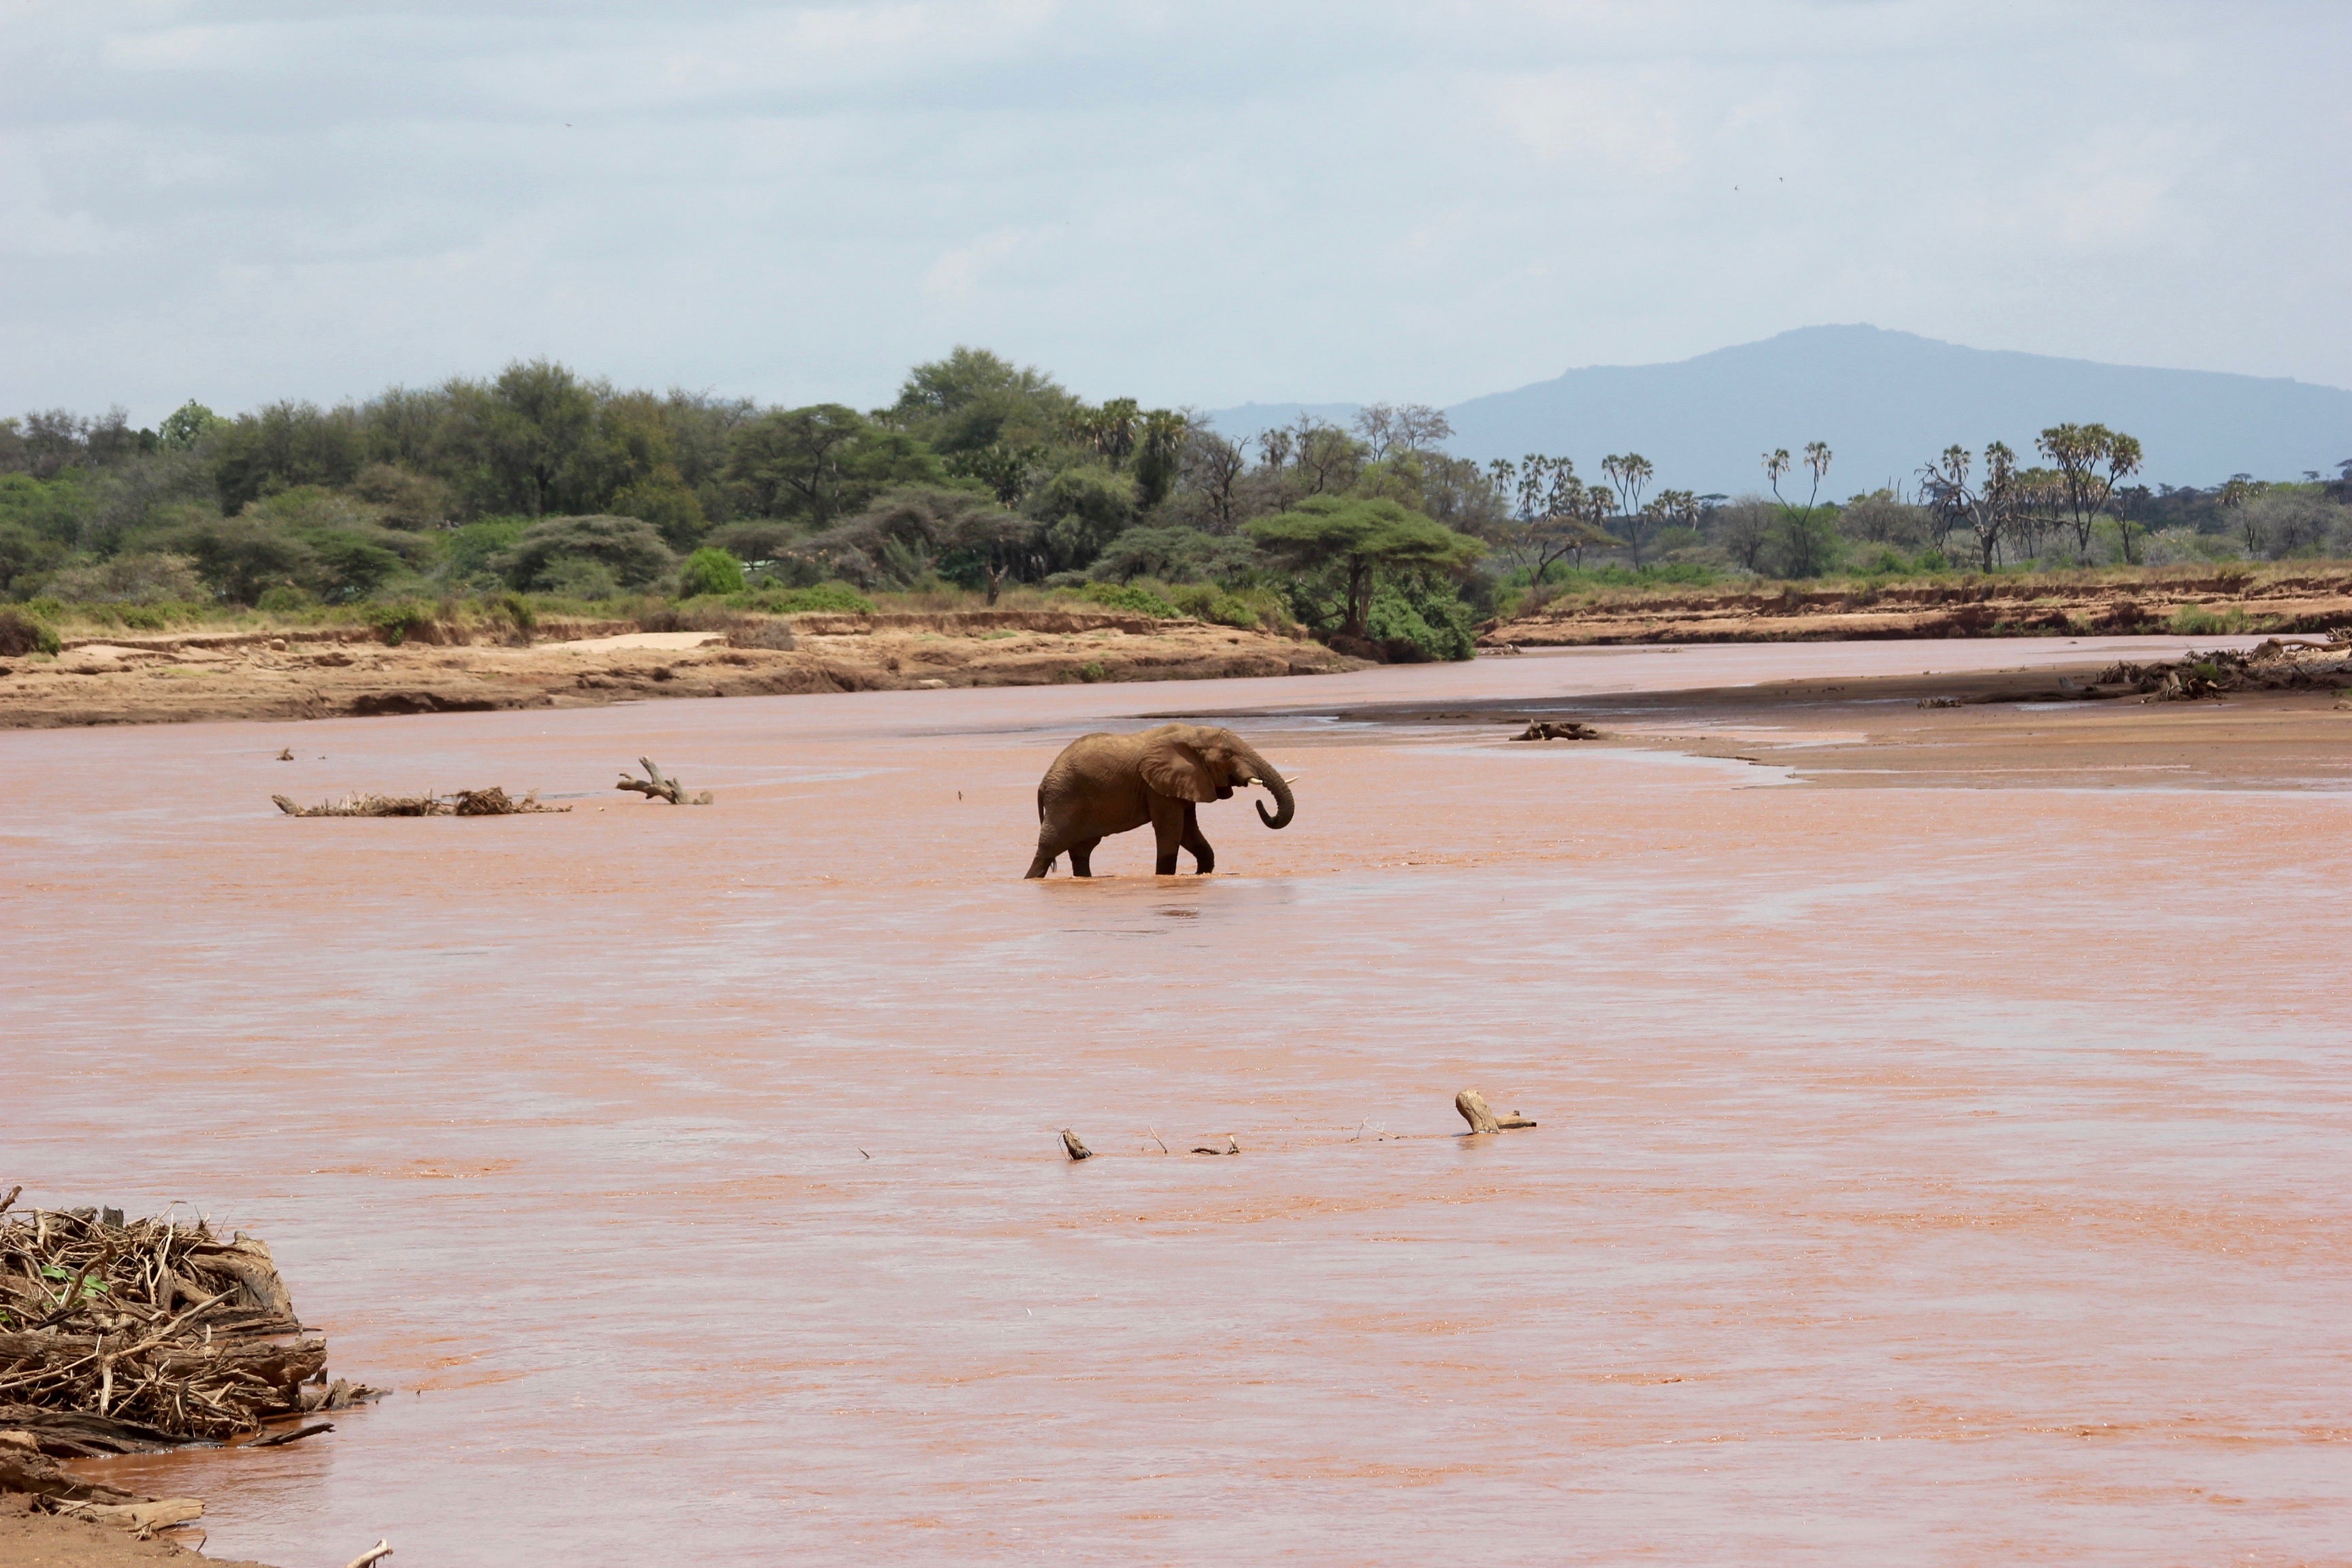 Protected areas act as an important wildlife corridor for Kenya’s major national parks